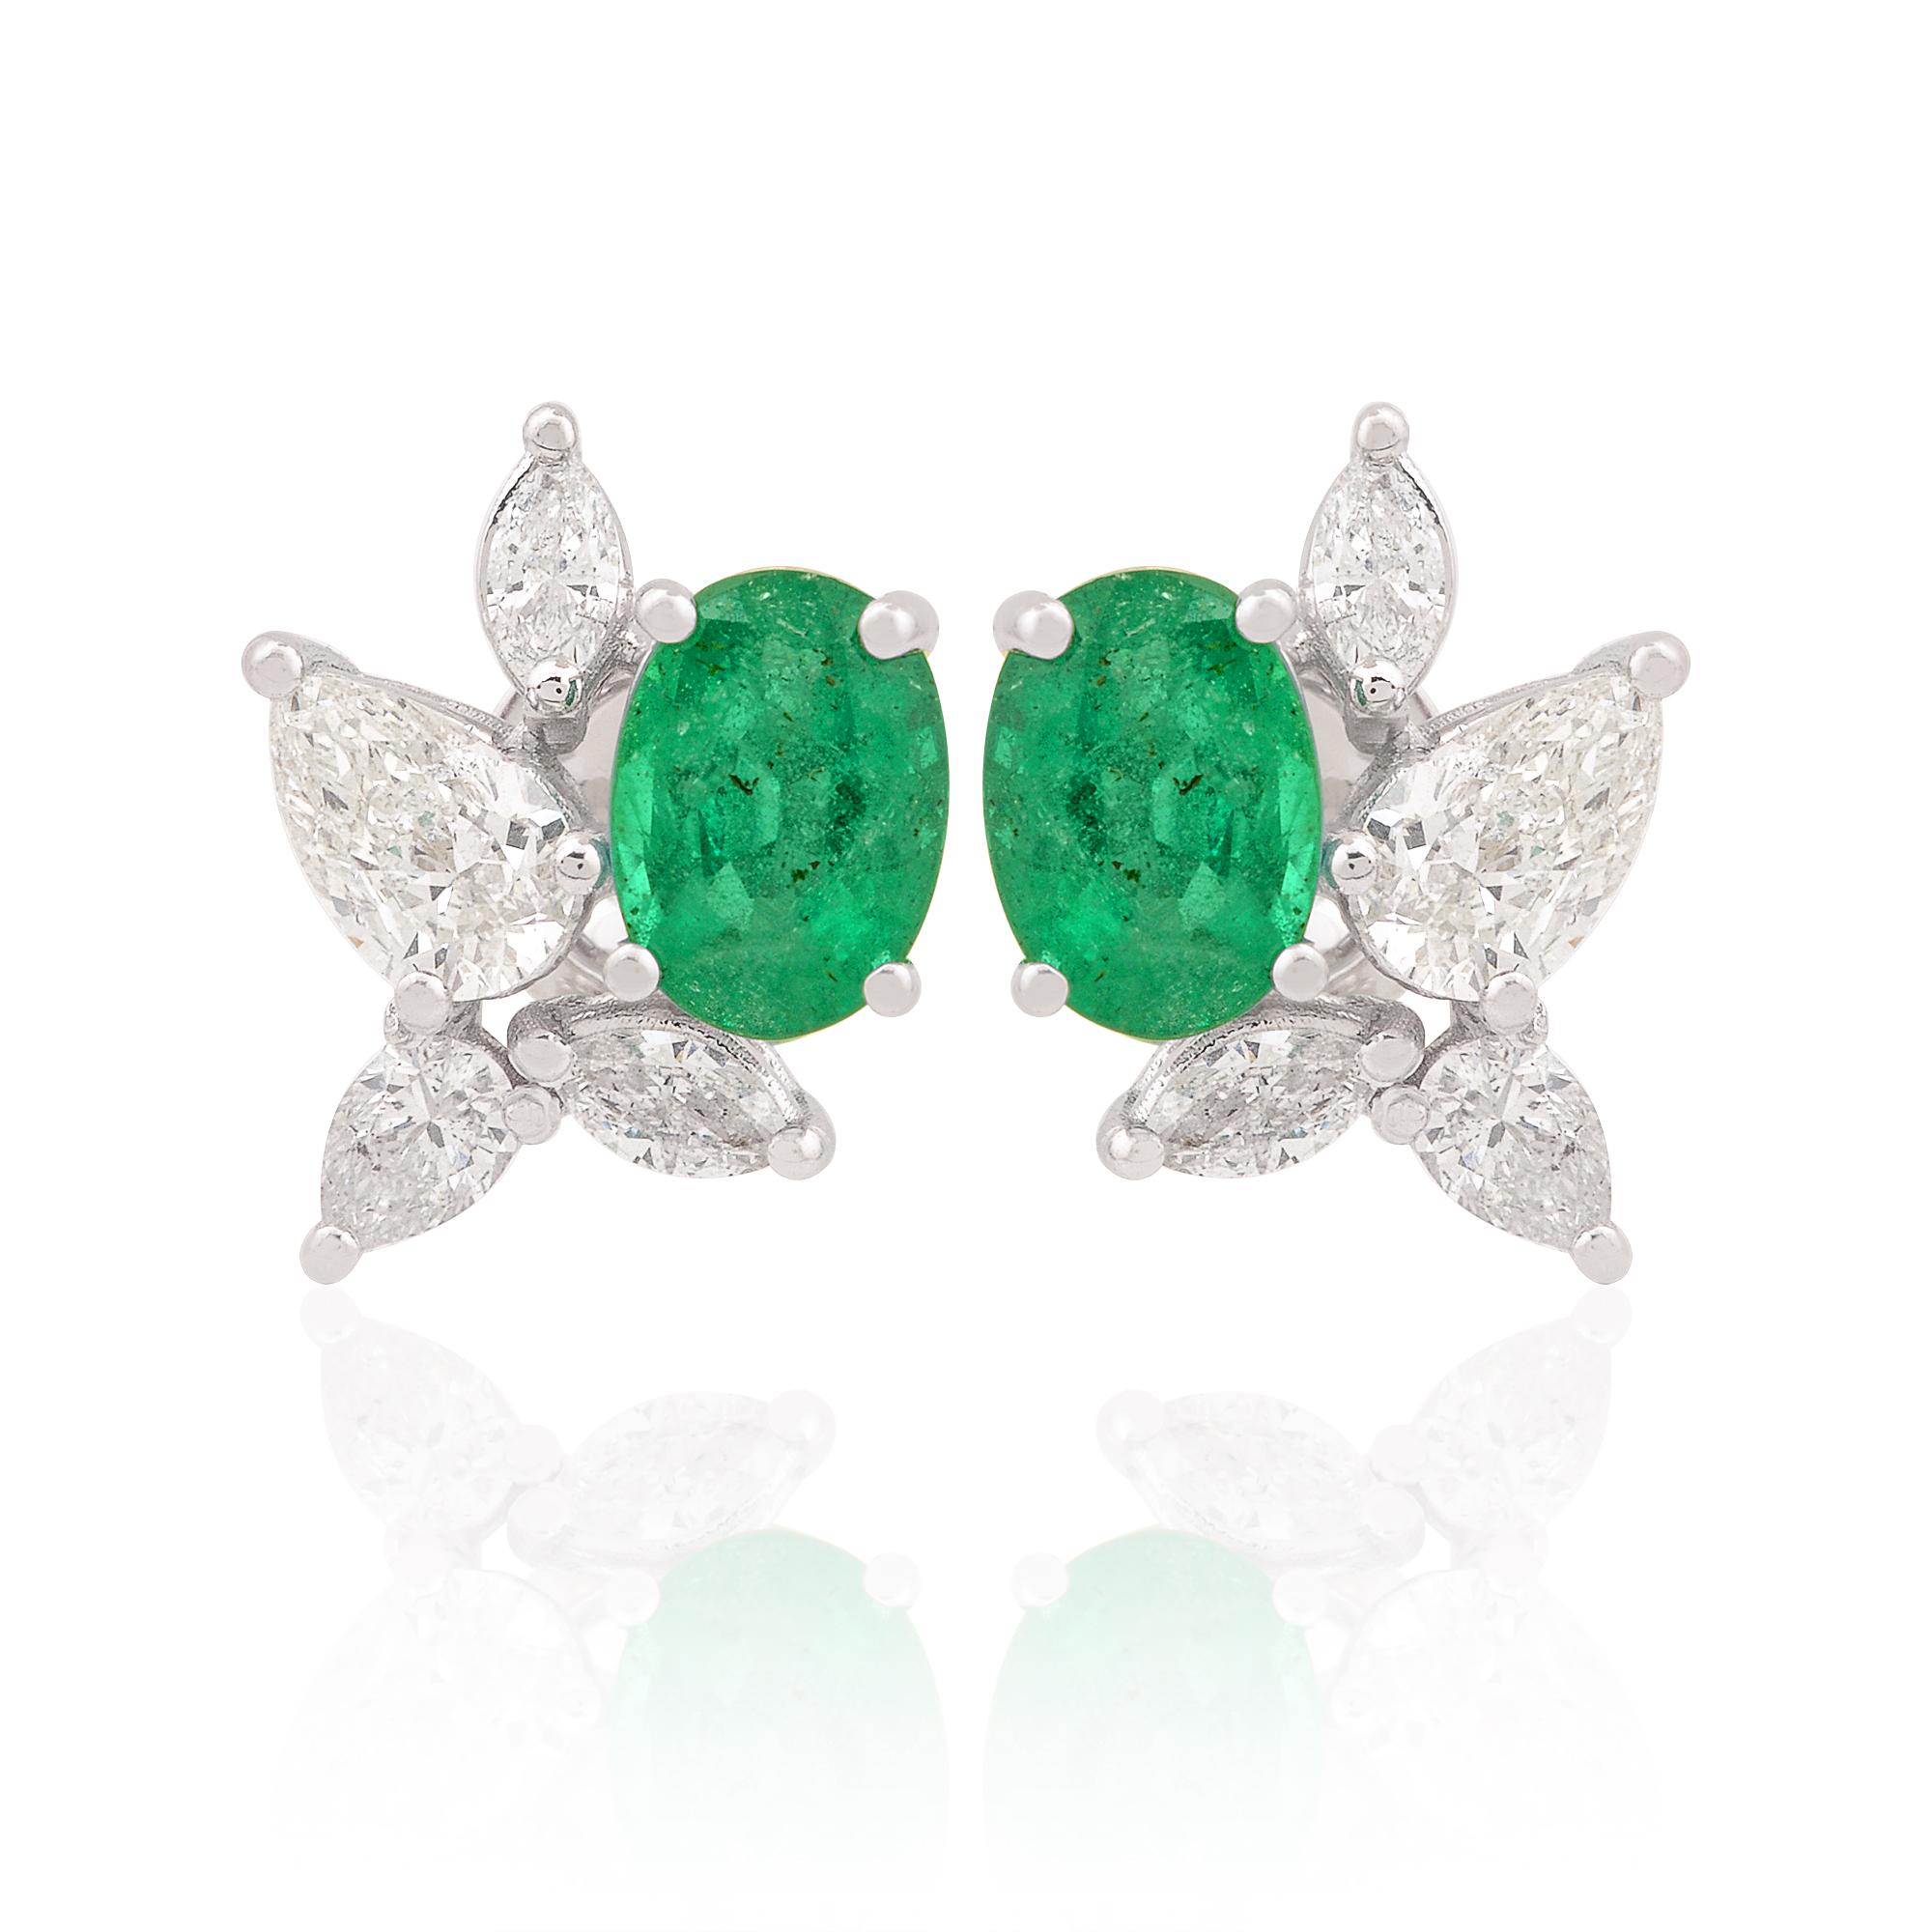 Item Code :- SEE-1656J
Gross Wt :- 3.68 gm
18k White Gold Wt :- 3.17 gm
Diamond Wt :- 1.10 Ct ( AVERAGE DIAMOND CLARITY SI1-SI2 & COLOR H-I )
Emerald Wt :- 1.47 Ct
Earrings Size :- 13x11 mm approx.
✦ Sizing
.....................
We can adjust most